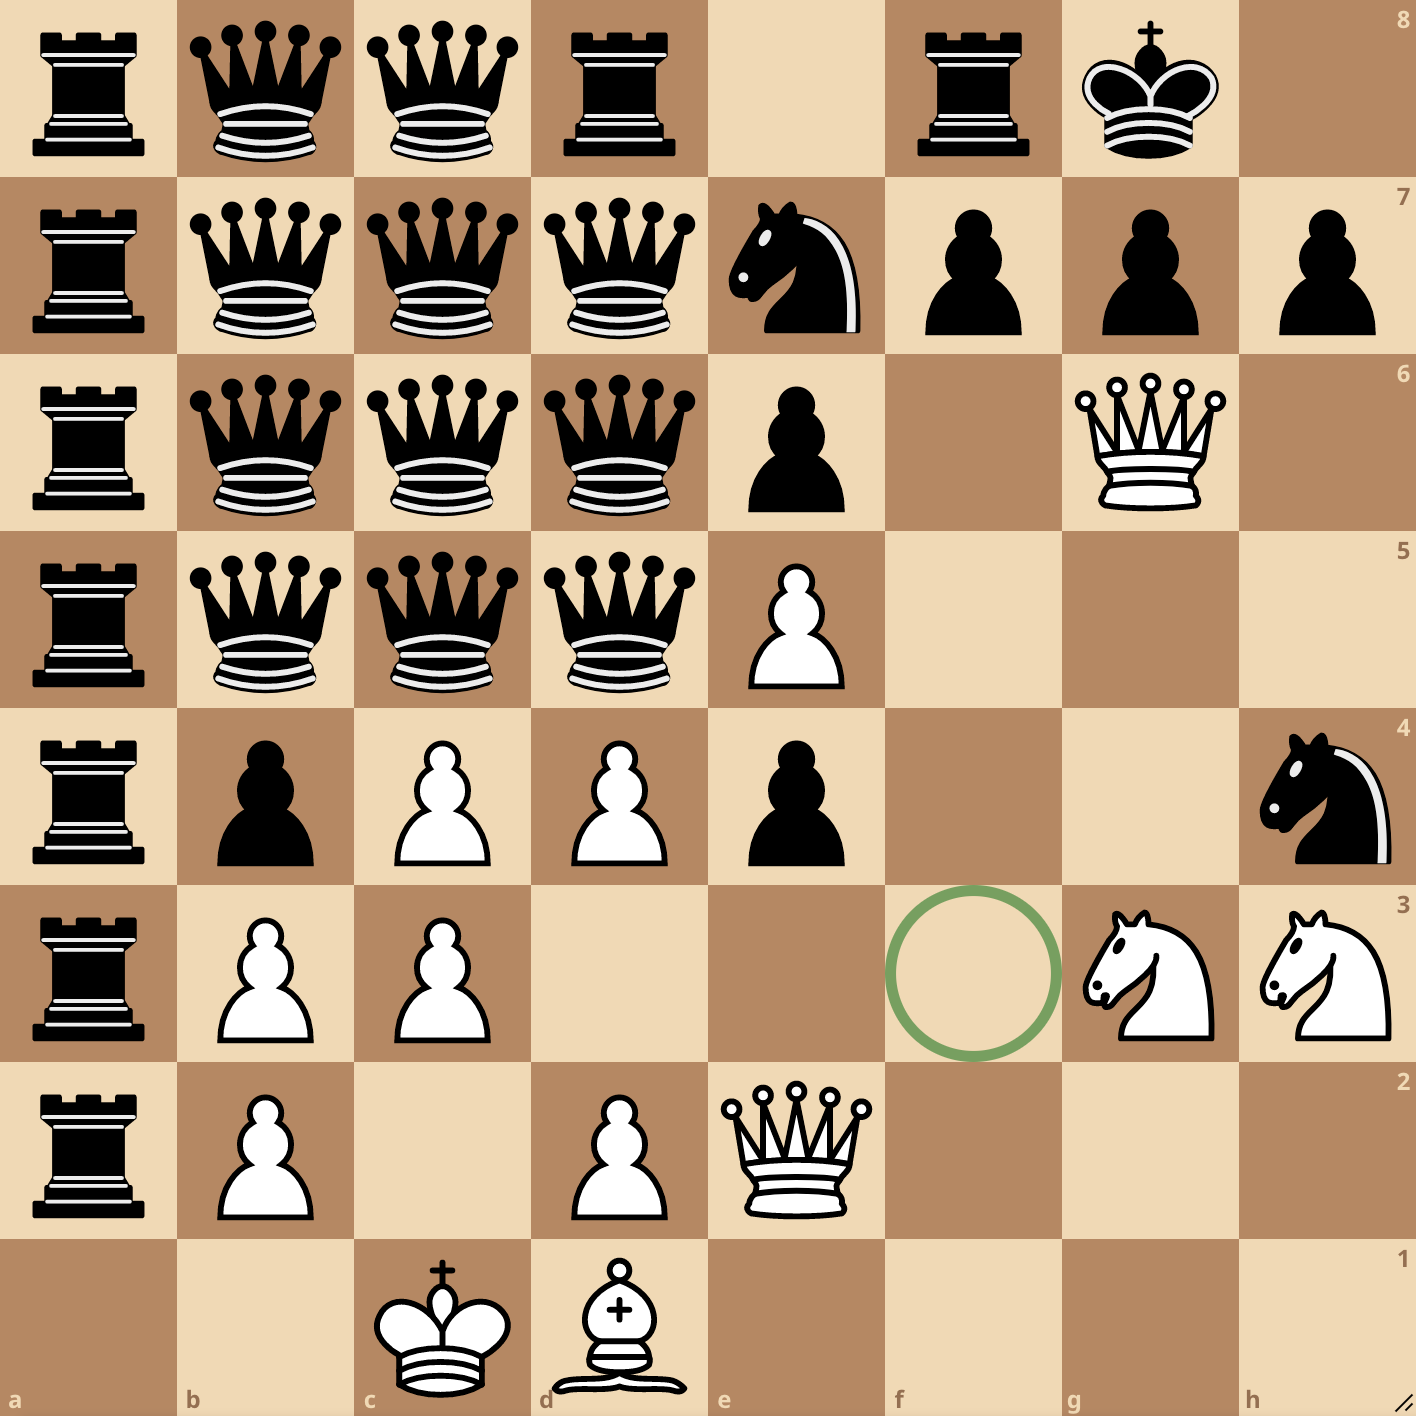 A chess board with a1 at the bottom left. A green circle marks f3. The board's FEN is below.